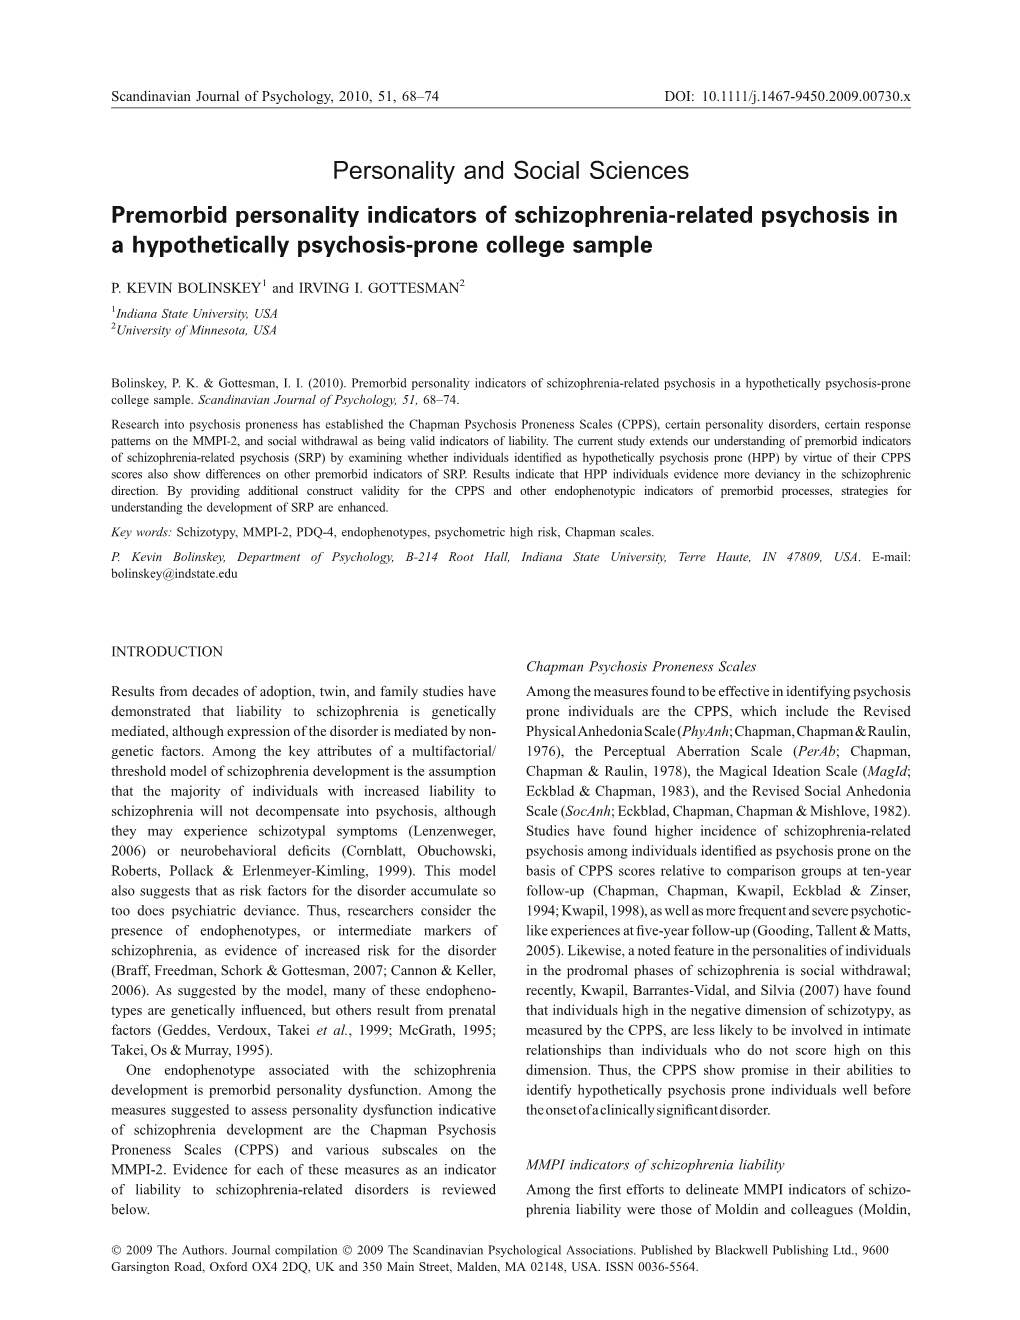 Personality and Social Sciences Premorbid Personality Indicators of Schizophrenia-Related Psychosis in a Hypothetically Psychosis-Prone College Sample